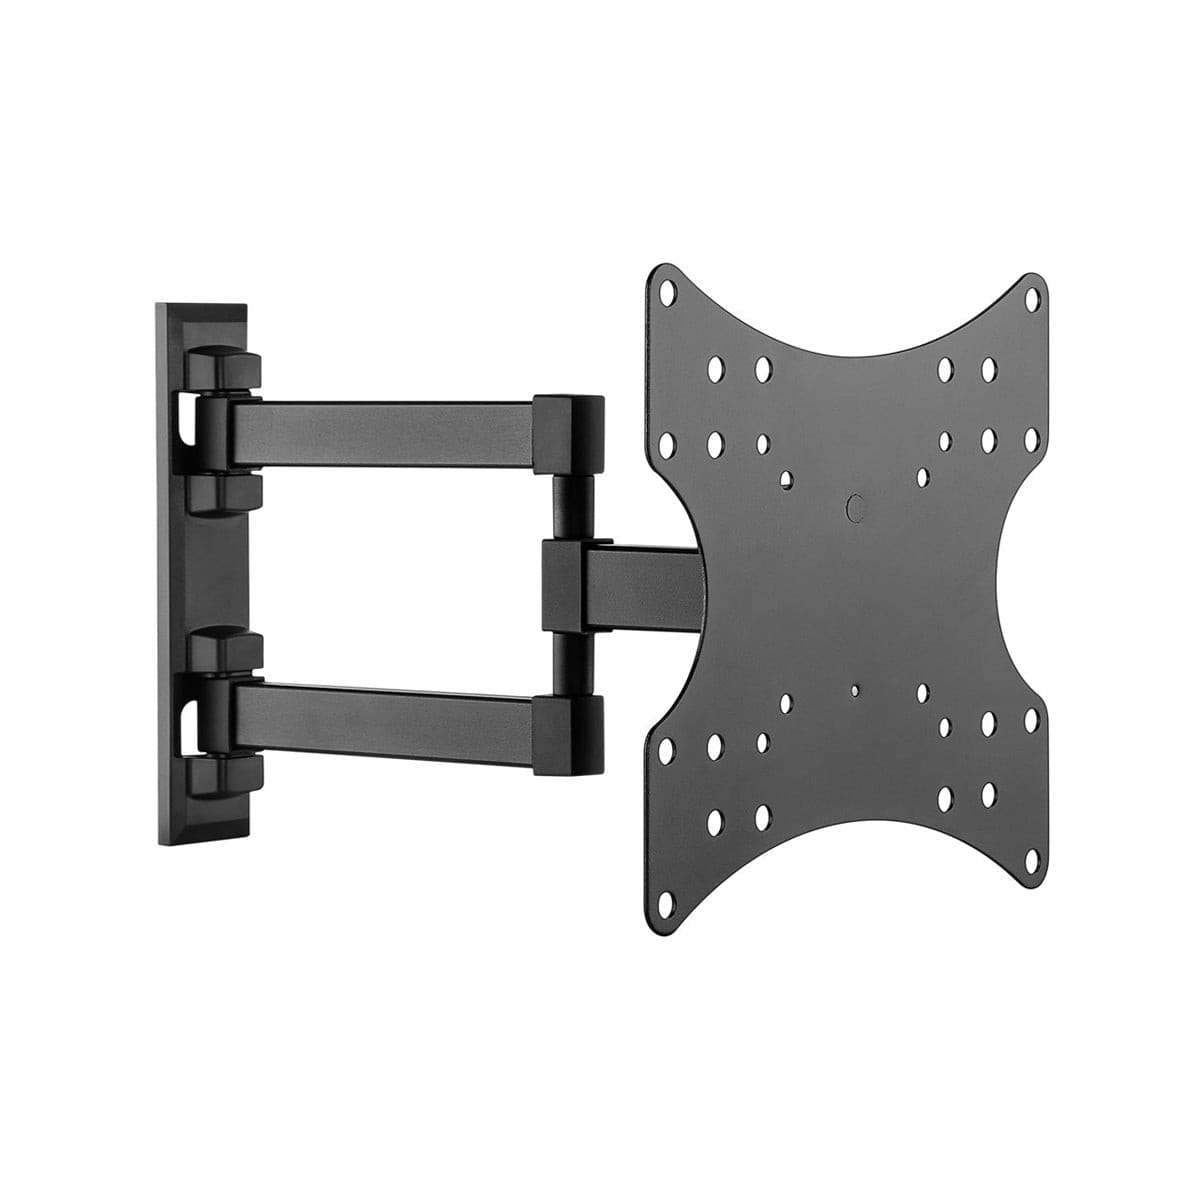 Goobay TV and Monitor Wall Mount Fullmotion S3 Double Arm Advanced for TVs (23 - 42